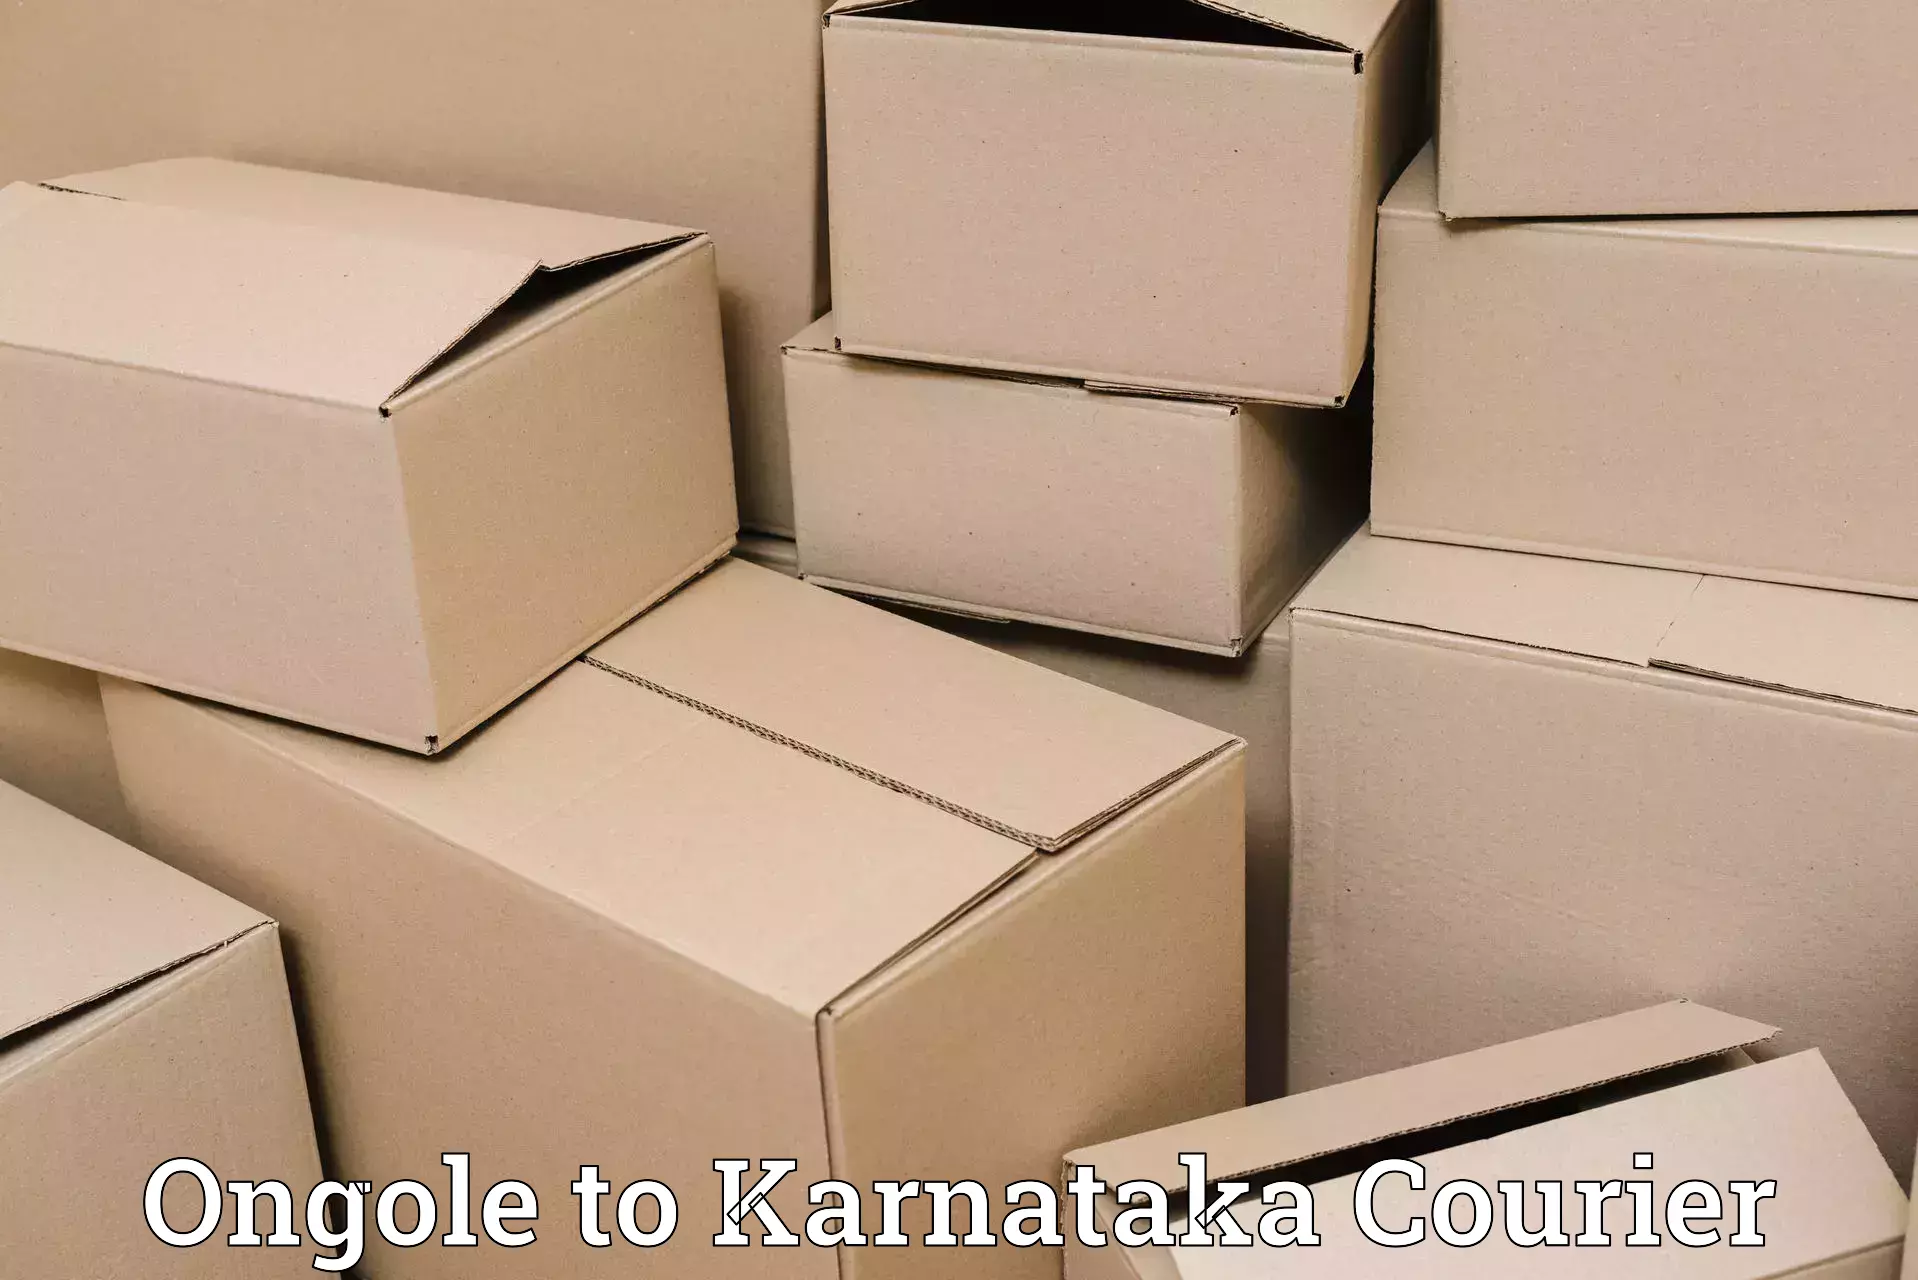 Multi-city courier Ongole to Yadgiri